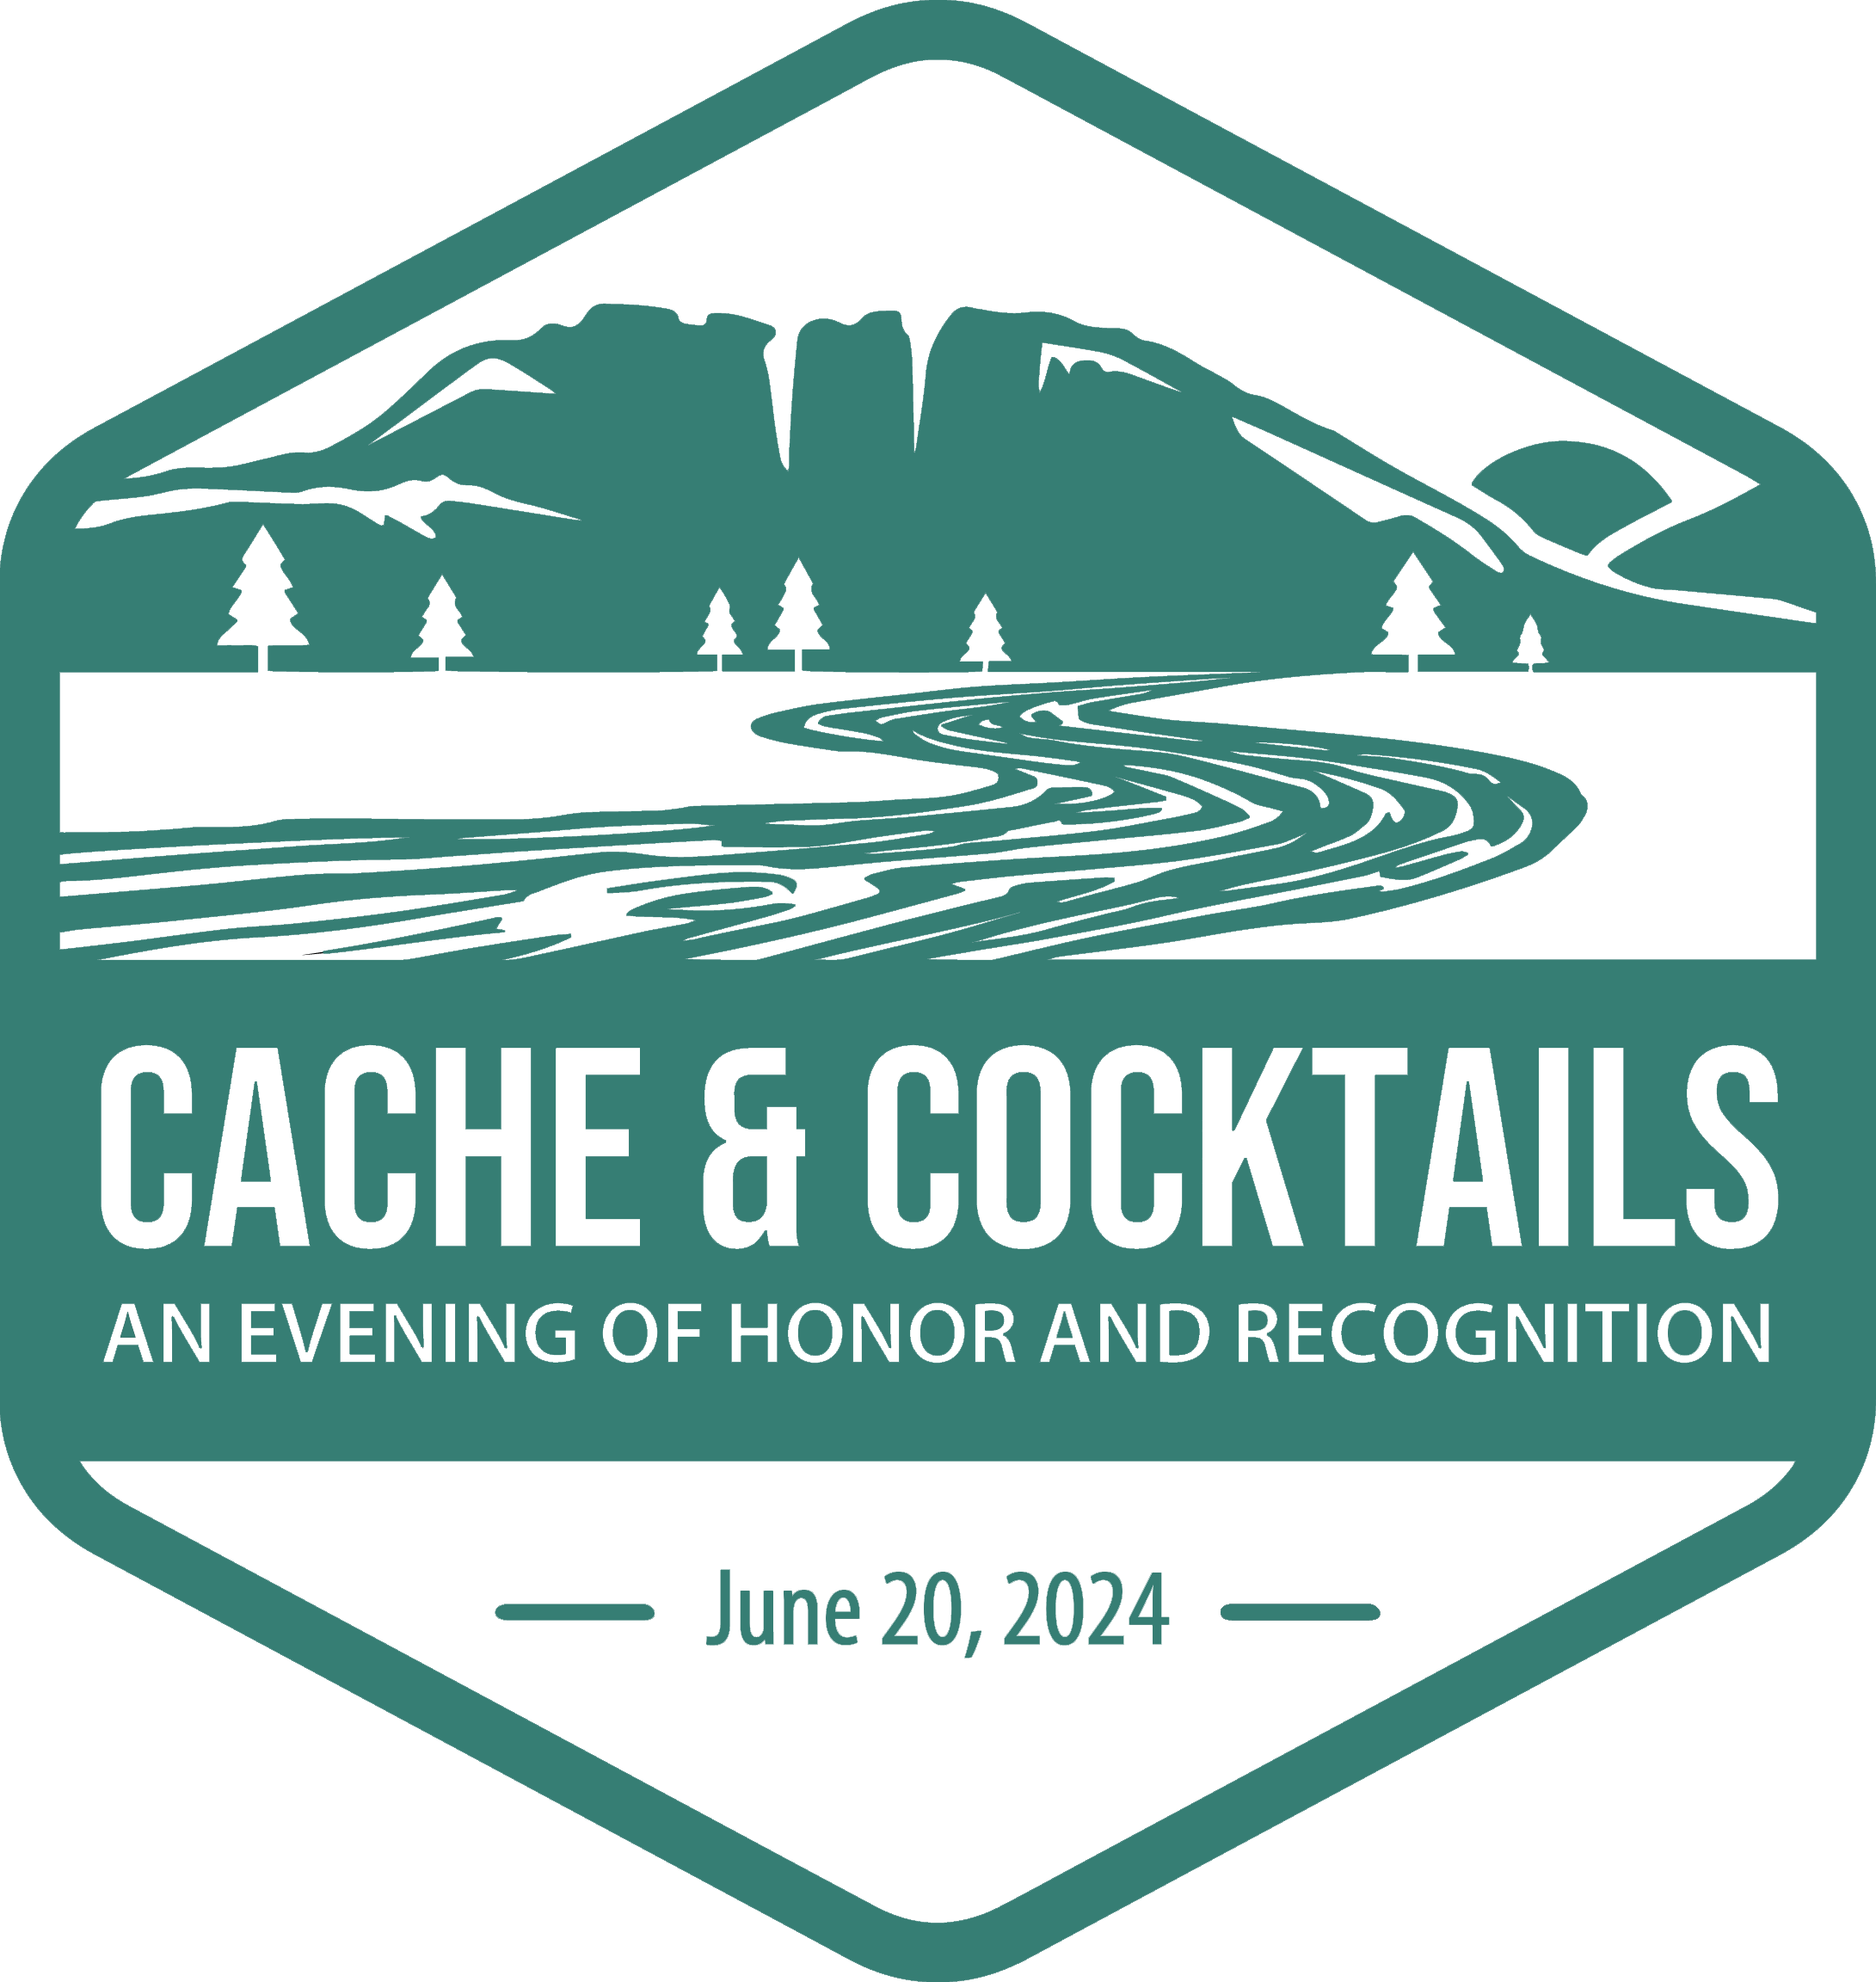 Event Promo Photo For Cache & Cocktails